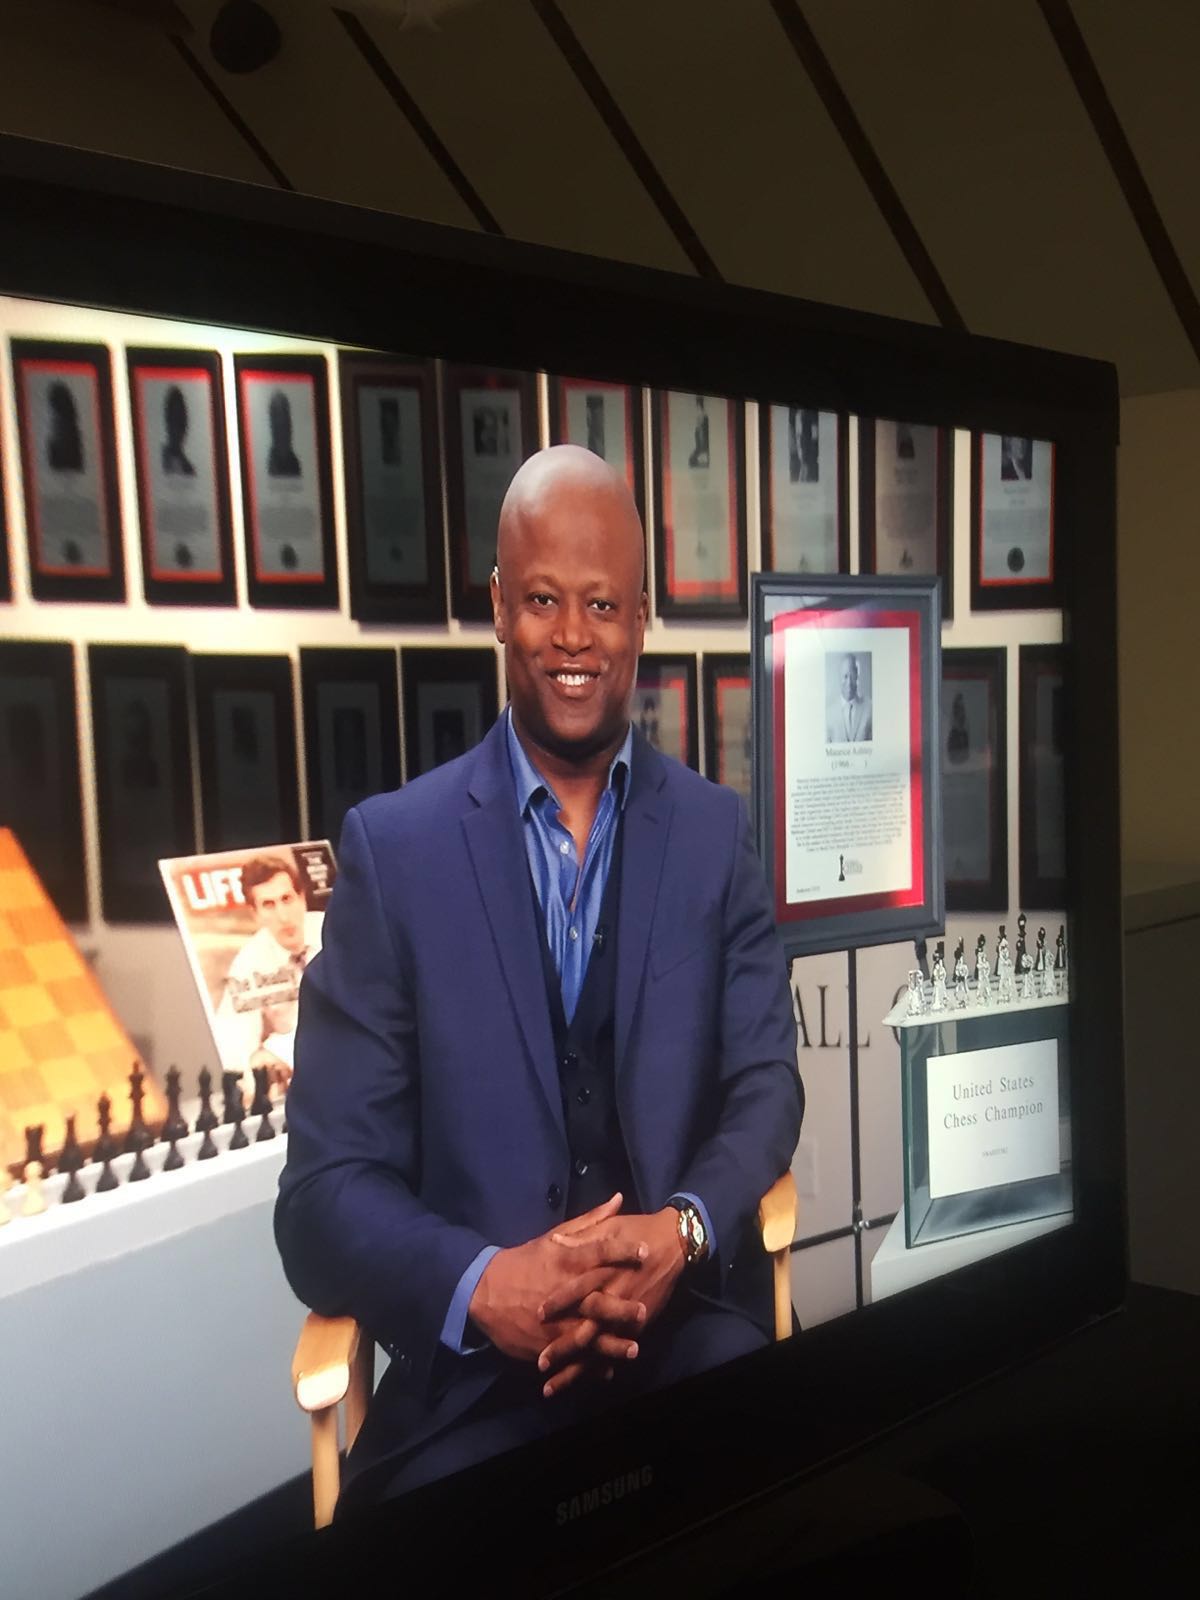 GM Maurice Ashley at the World Chess Hall of Fame with his plaque. Photo courtesy of Maurice Ashley